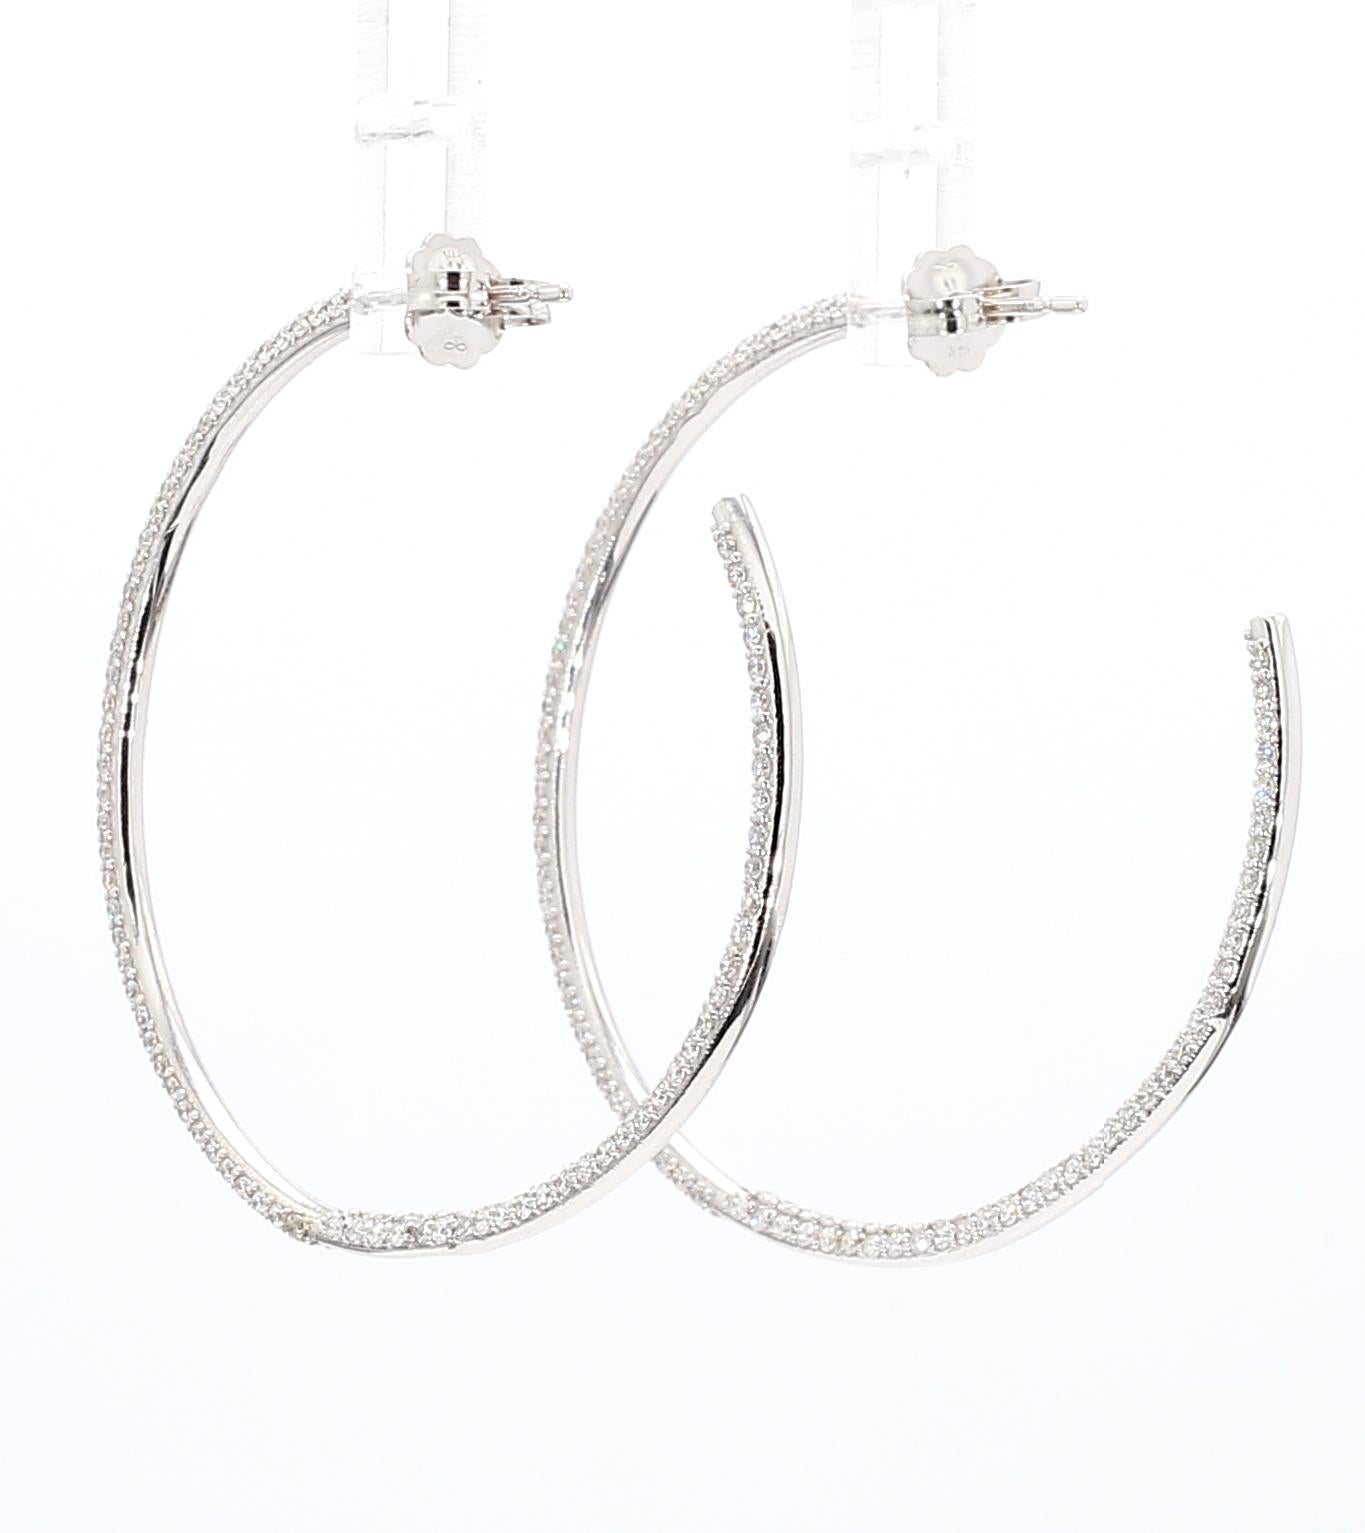 A rare intricately set *three-row* pair of Diamond Hoop Earrings

In-and-out Diamond Hoop Earrings Set in 14K White Gold

2.14 carats total weight [454 stones] 0.05 Ct (each stone)

A work of art. Please check the photos to see the intricate